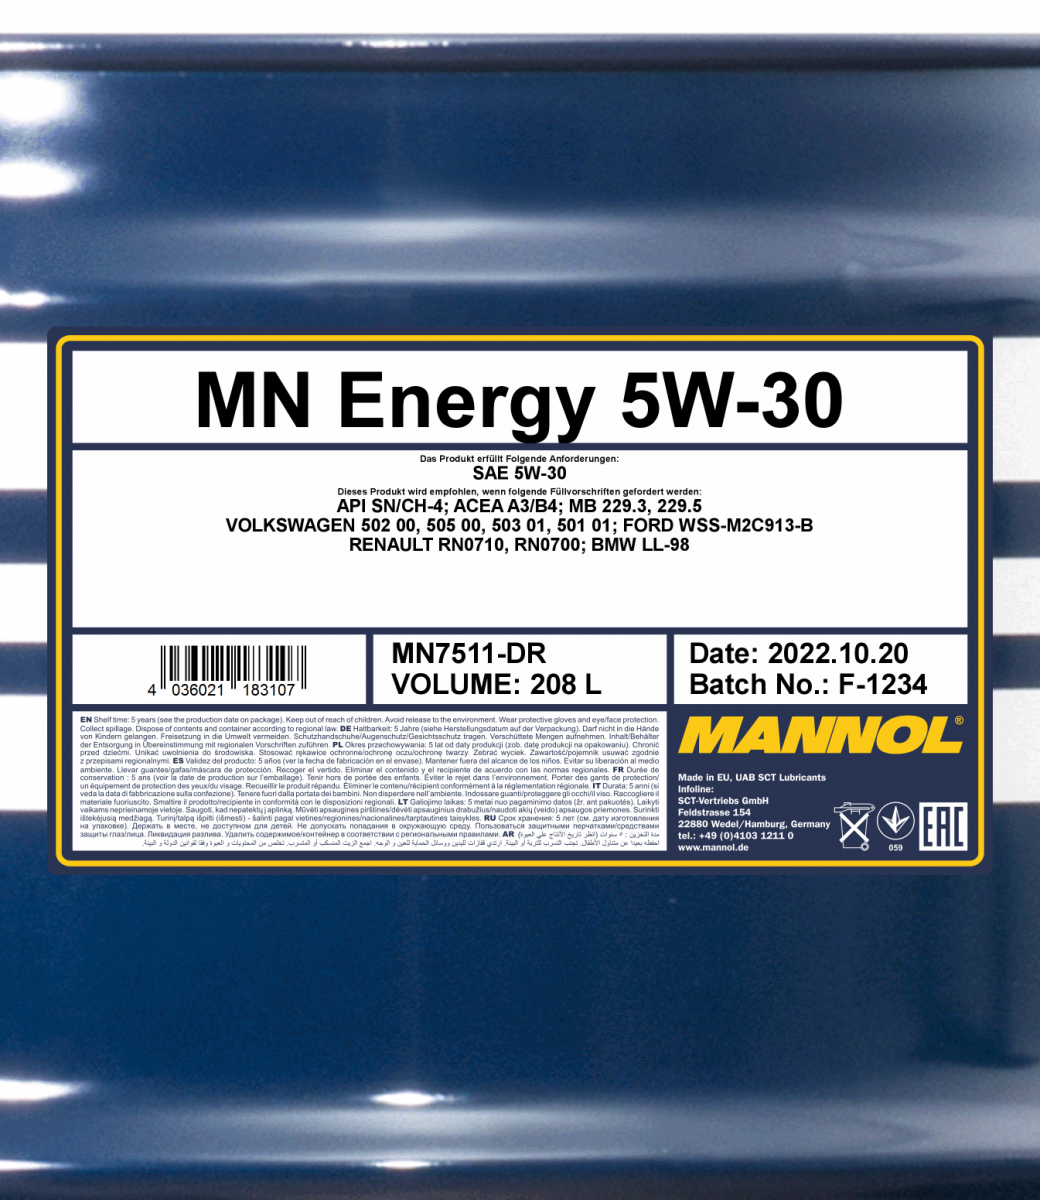 Mannol Full Synthetic Engine Oil 5W-30 for modern Toyota & Lexus- MN7709  (1L)